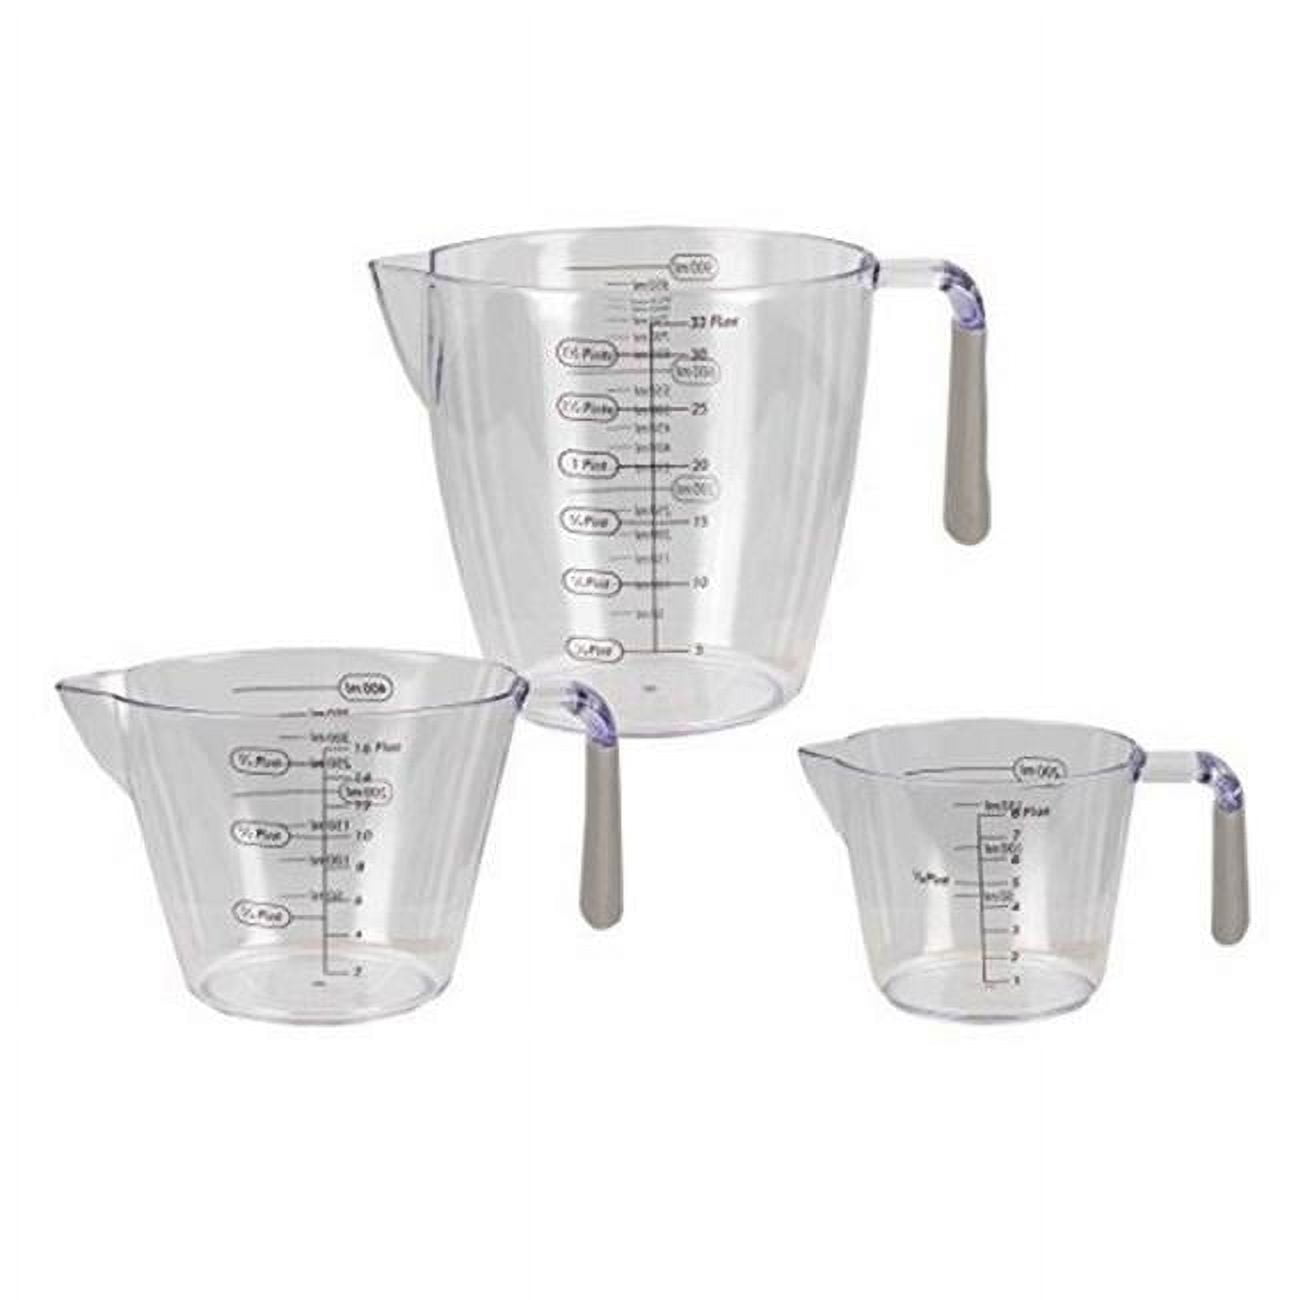 OXO Good Grips Squeeze & Pour 3-Piece Silicone Measuring Cup Set